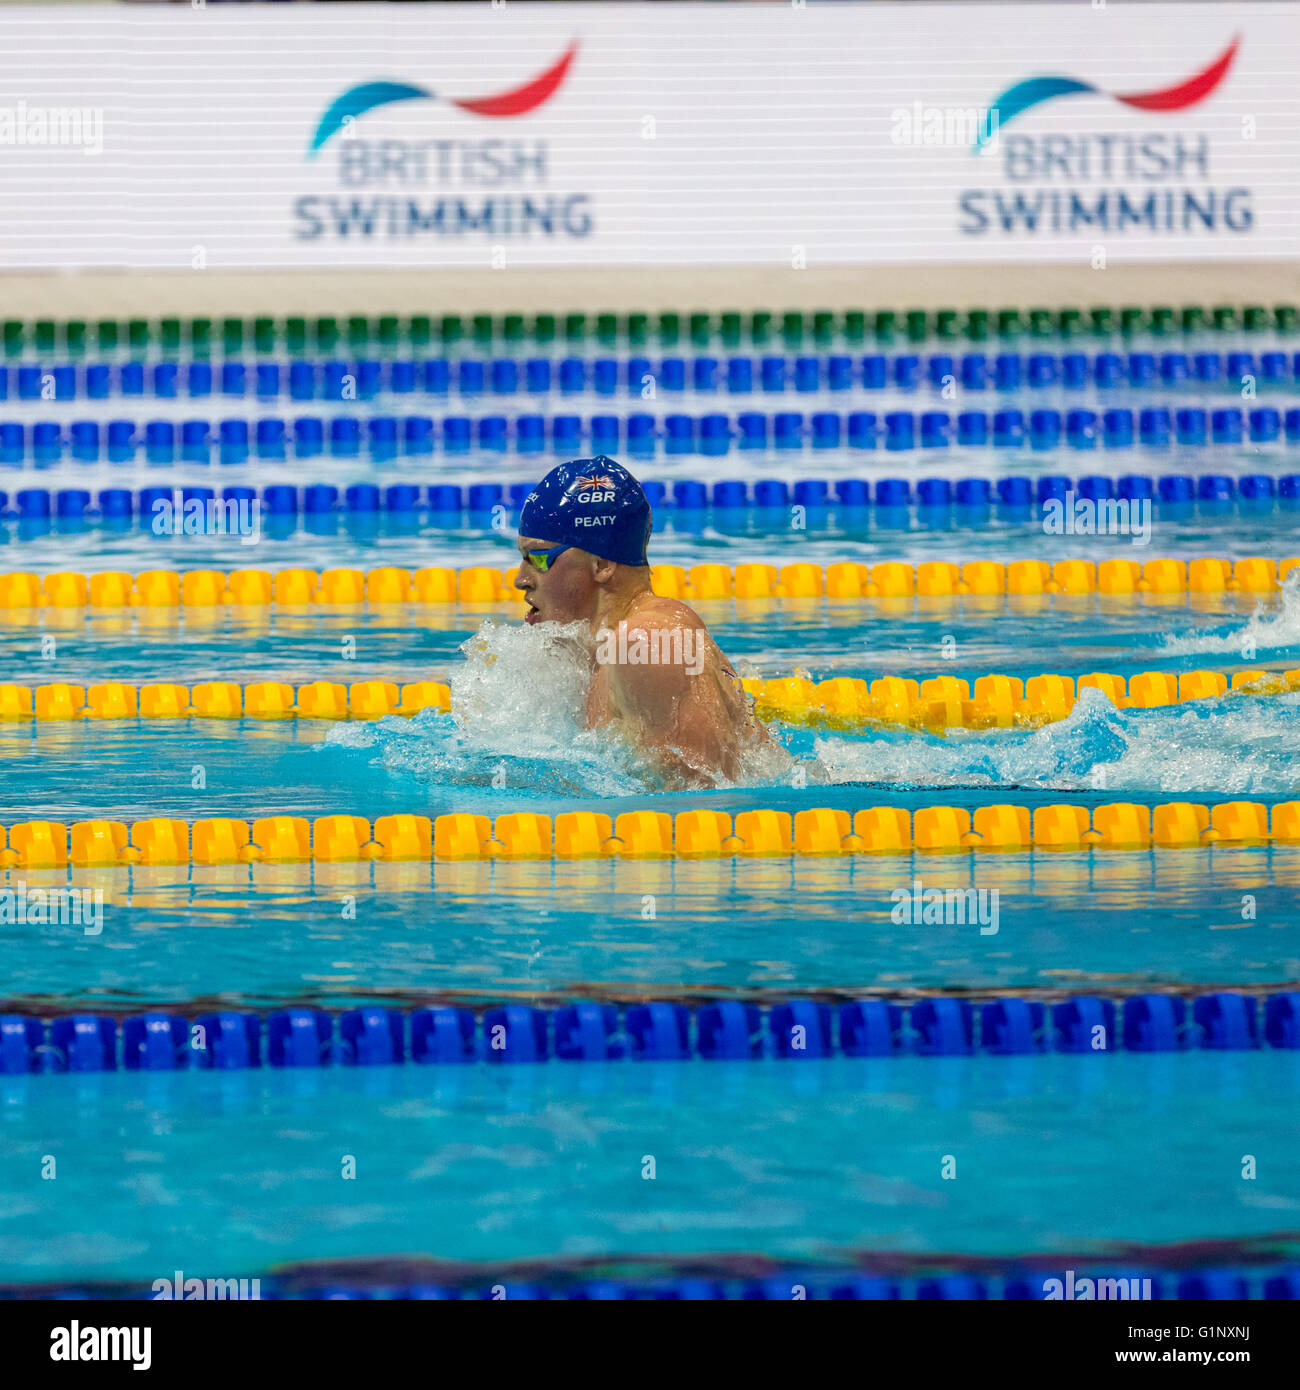 London,  UK. 17th May, 2016. Aquatics Centre, London, UK, 17th May 2016. British swimmer and Kazan World Champion Adam Peaty in the 100m breaststroke final. Adam Peaty wins gold in 58.36s, with the second British swimmer Ross Murdoch taking silver (59.73s) and Lithuanian Giedrius Titenis winning bronze. Credit:  Imageplotter News and Sports/Alamy Live News Stock Photo